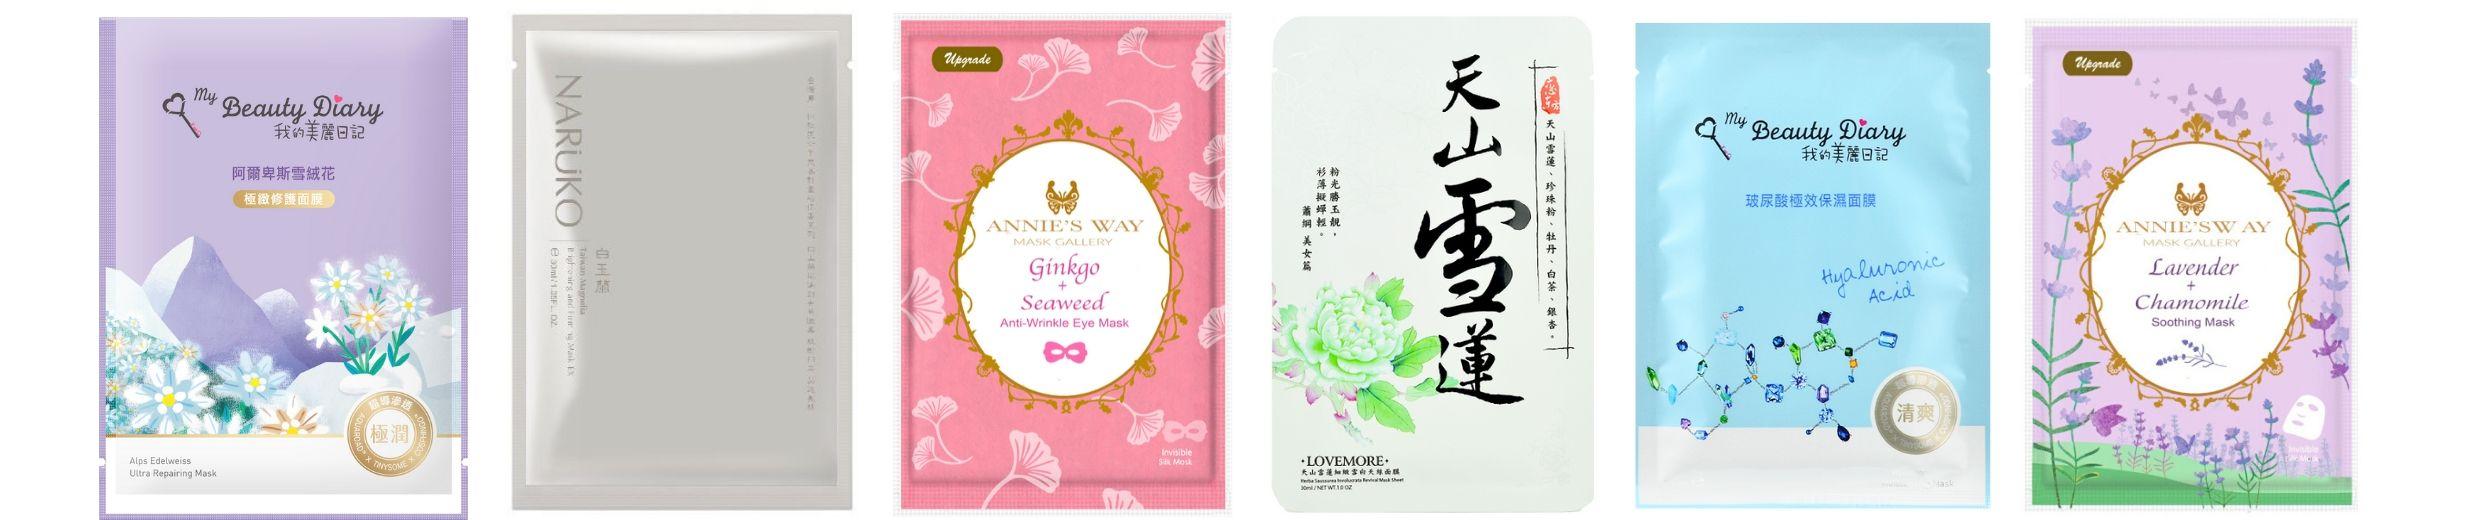 Taiwanese Beauty Is Up-and-Coming: Here's What You Need to Know